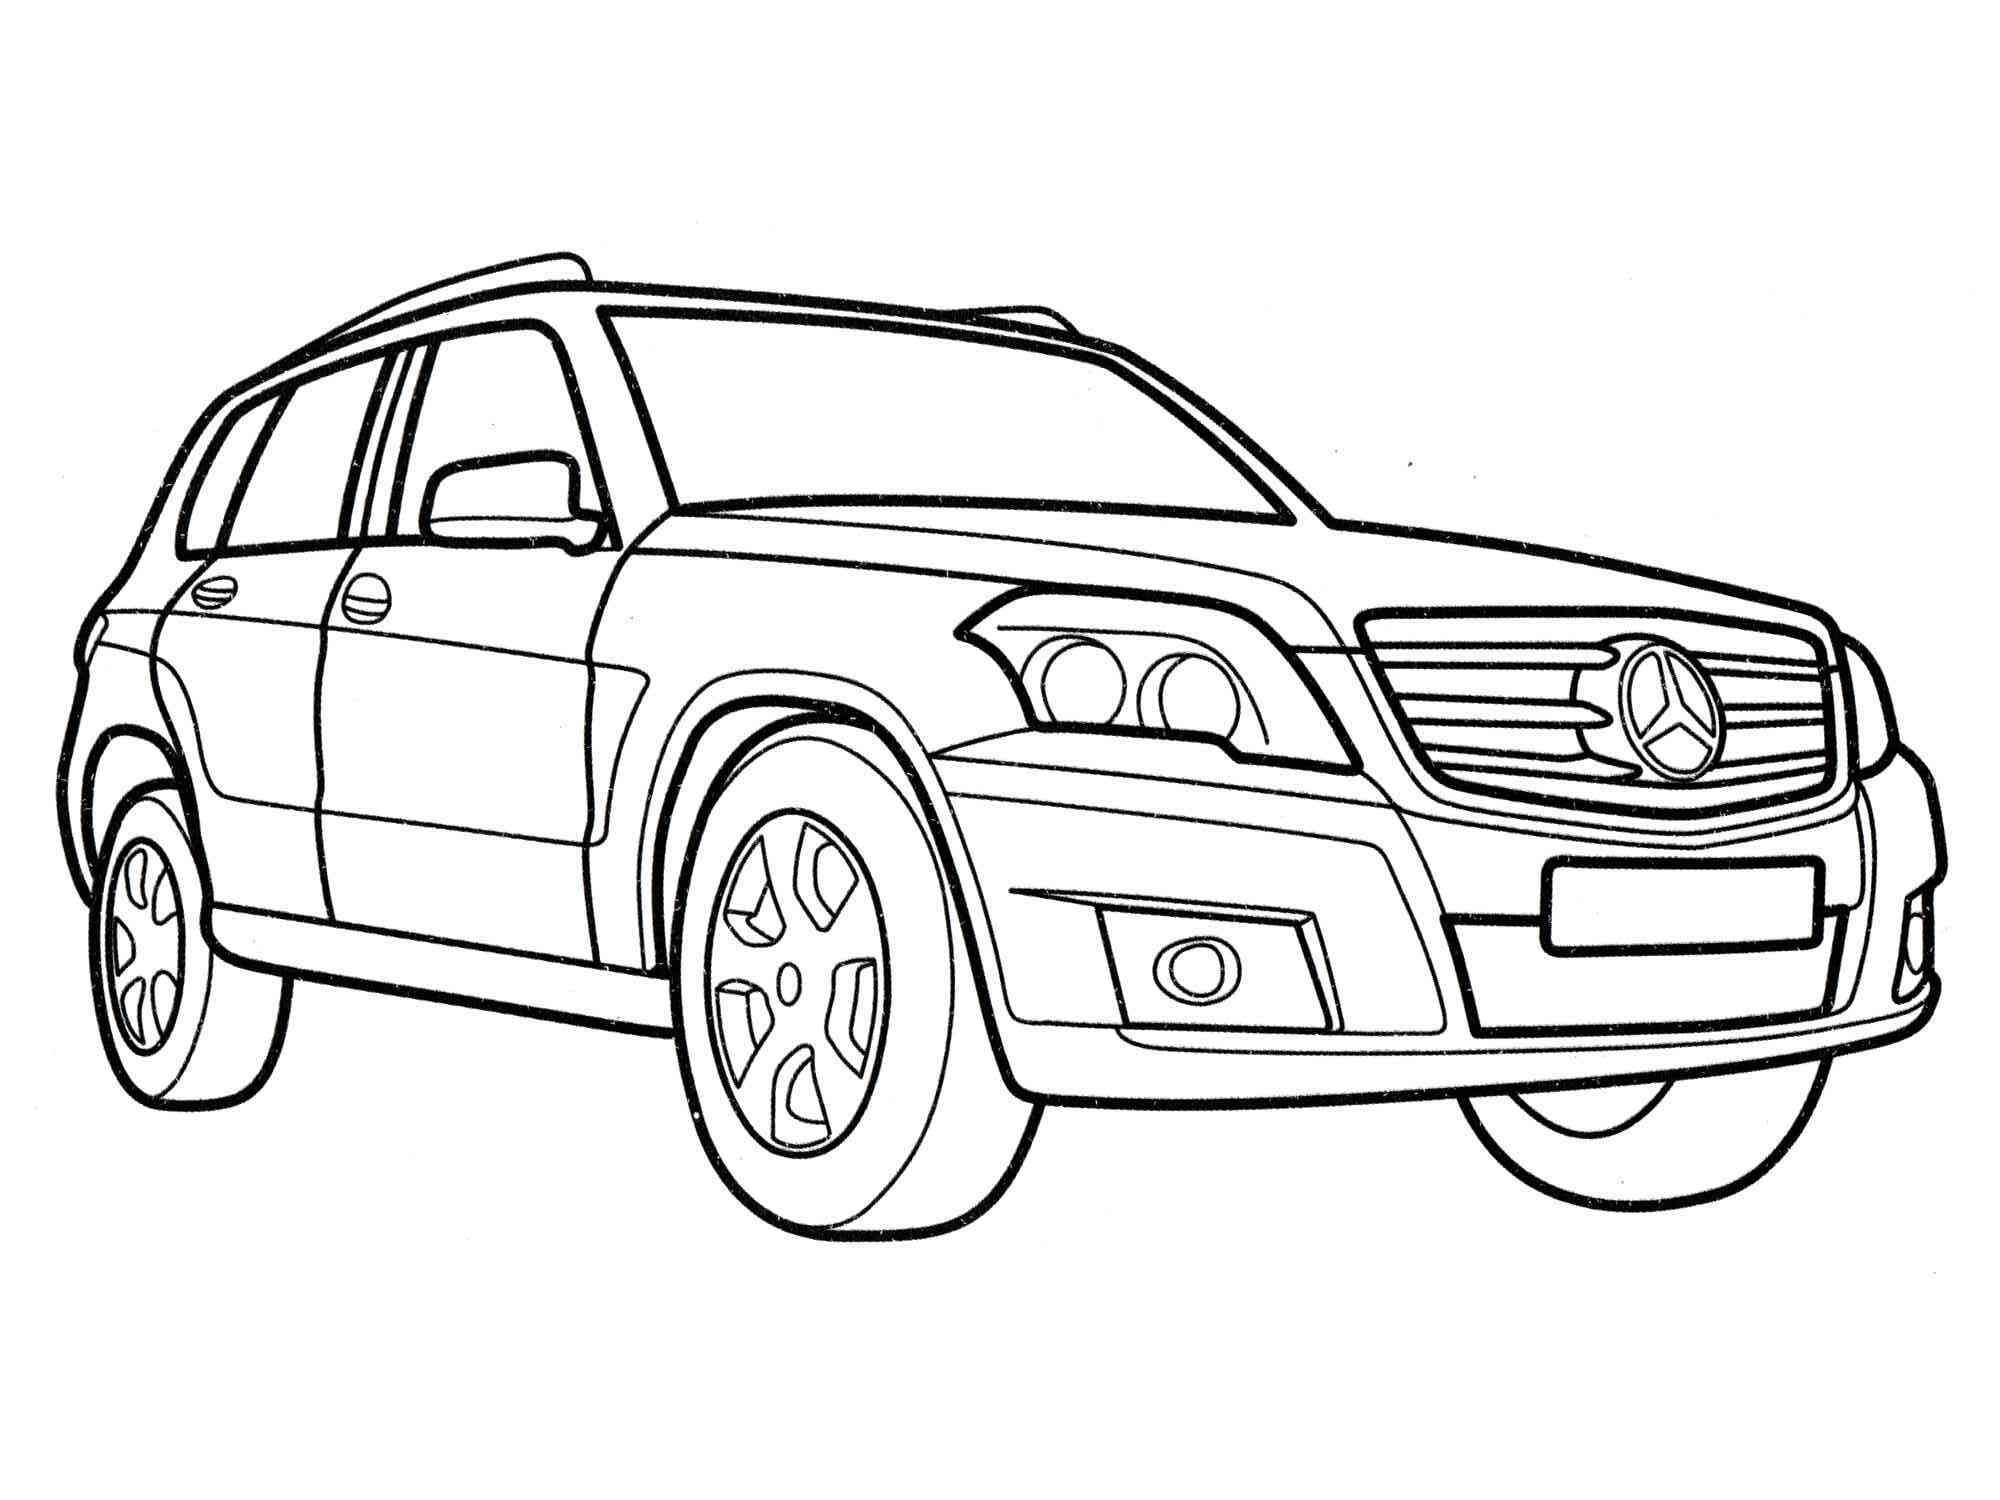 Mercedes Coloring Page. Free Printable Mercedes Coloring Page ...